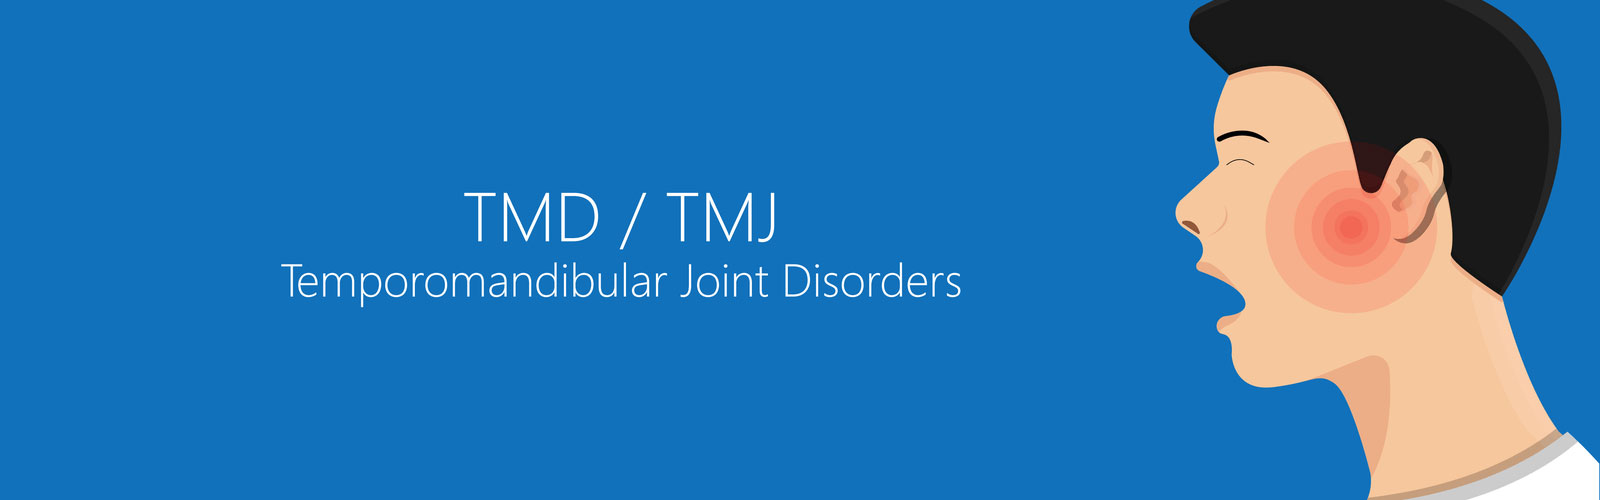 CASE STUDY: Sedation for TMJ Disfunction